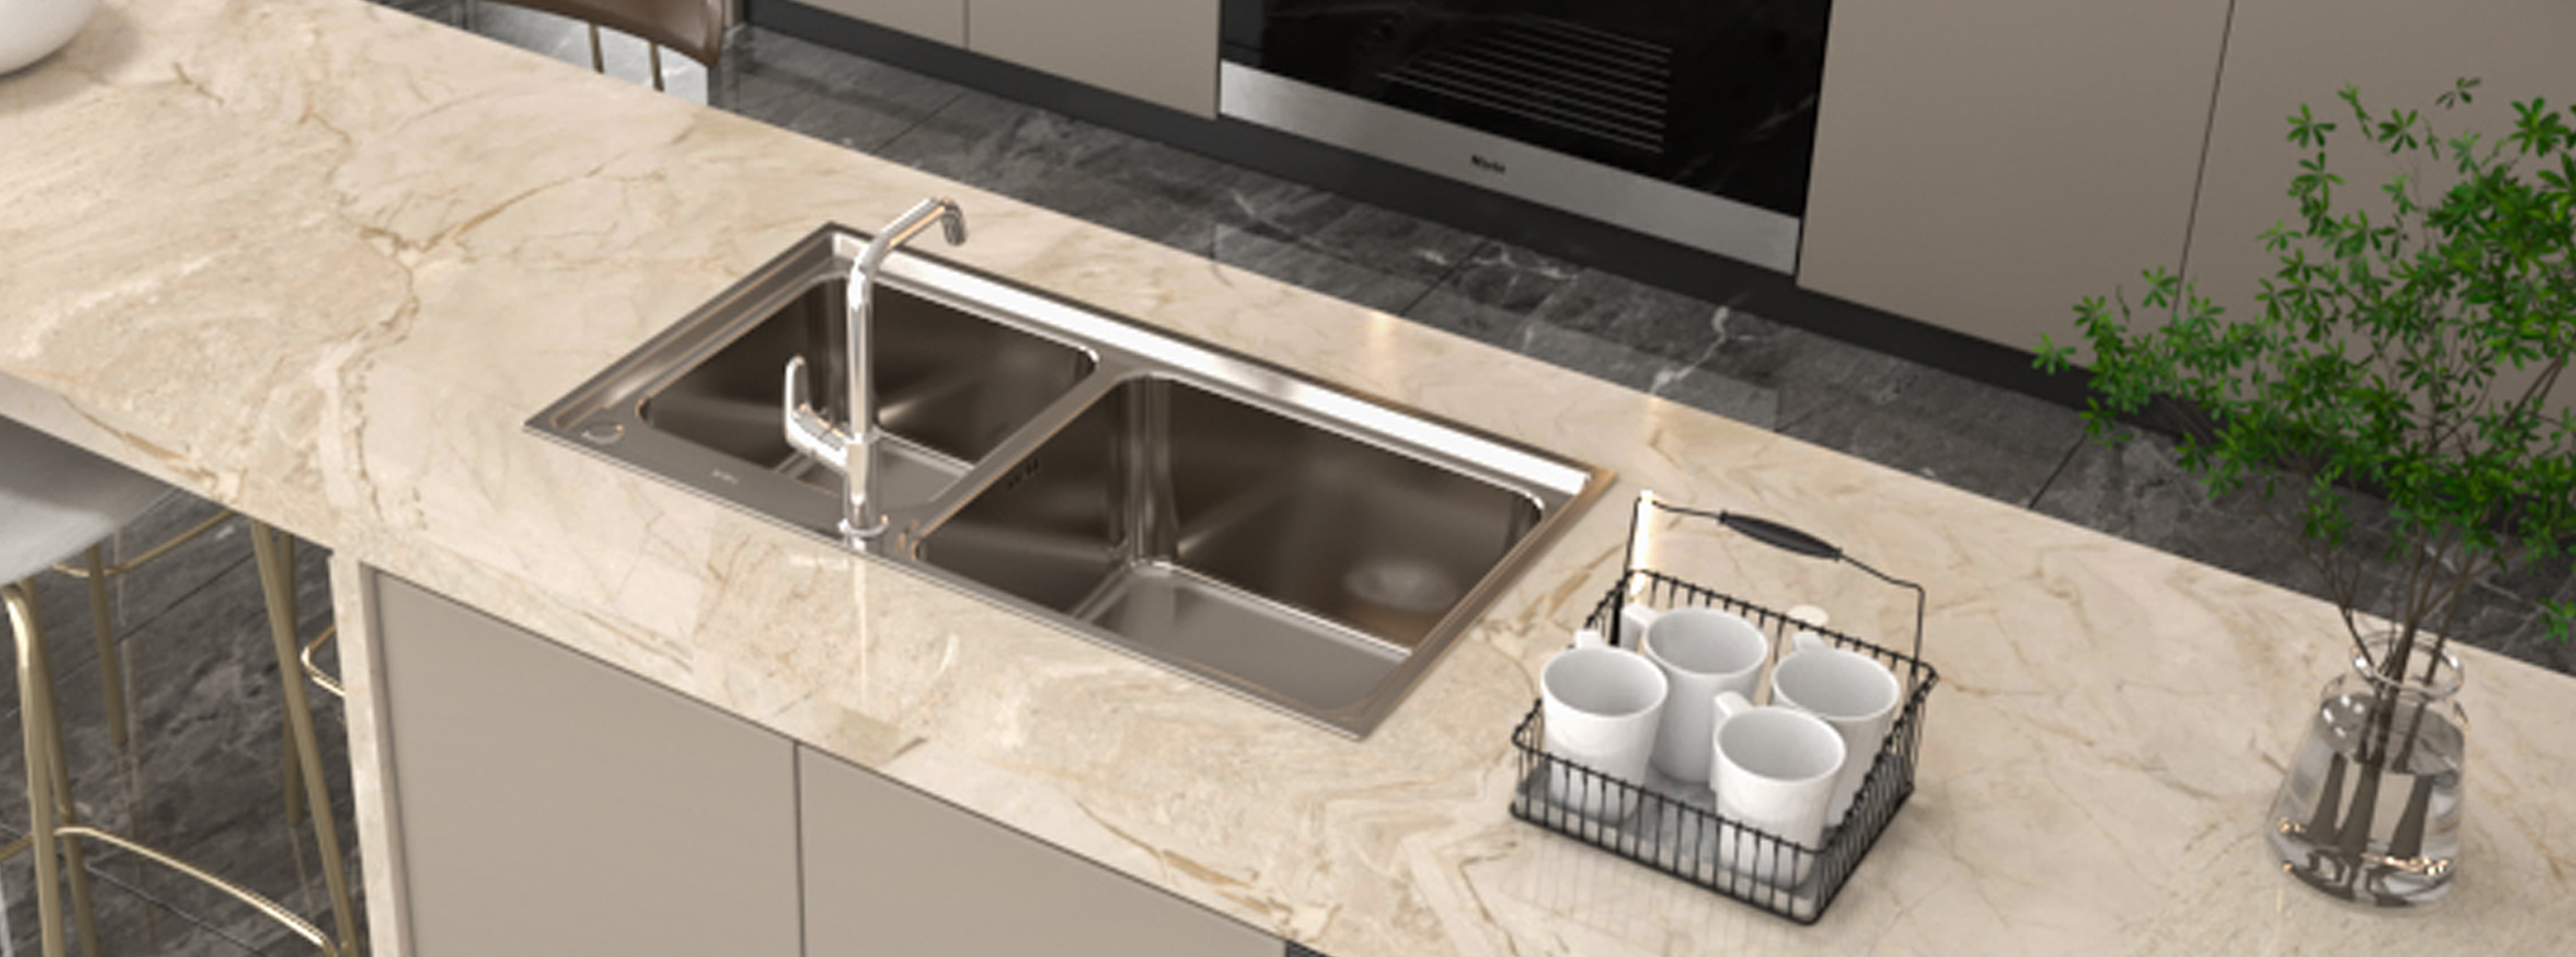 Stainless Steel Kitchen Sink - Save Up to 15%